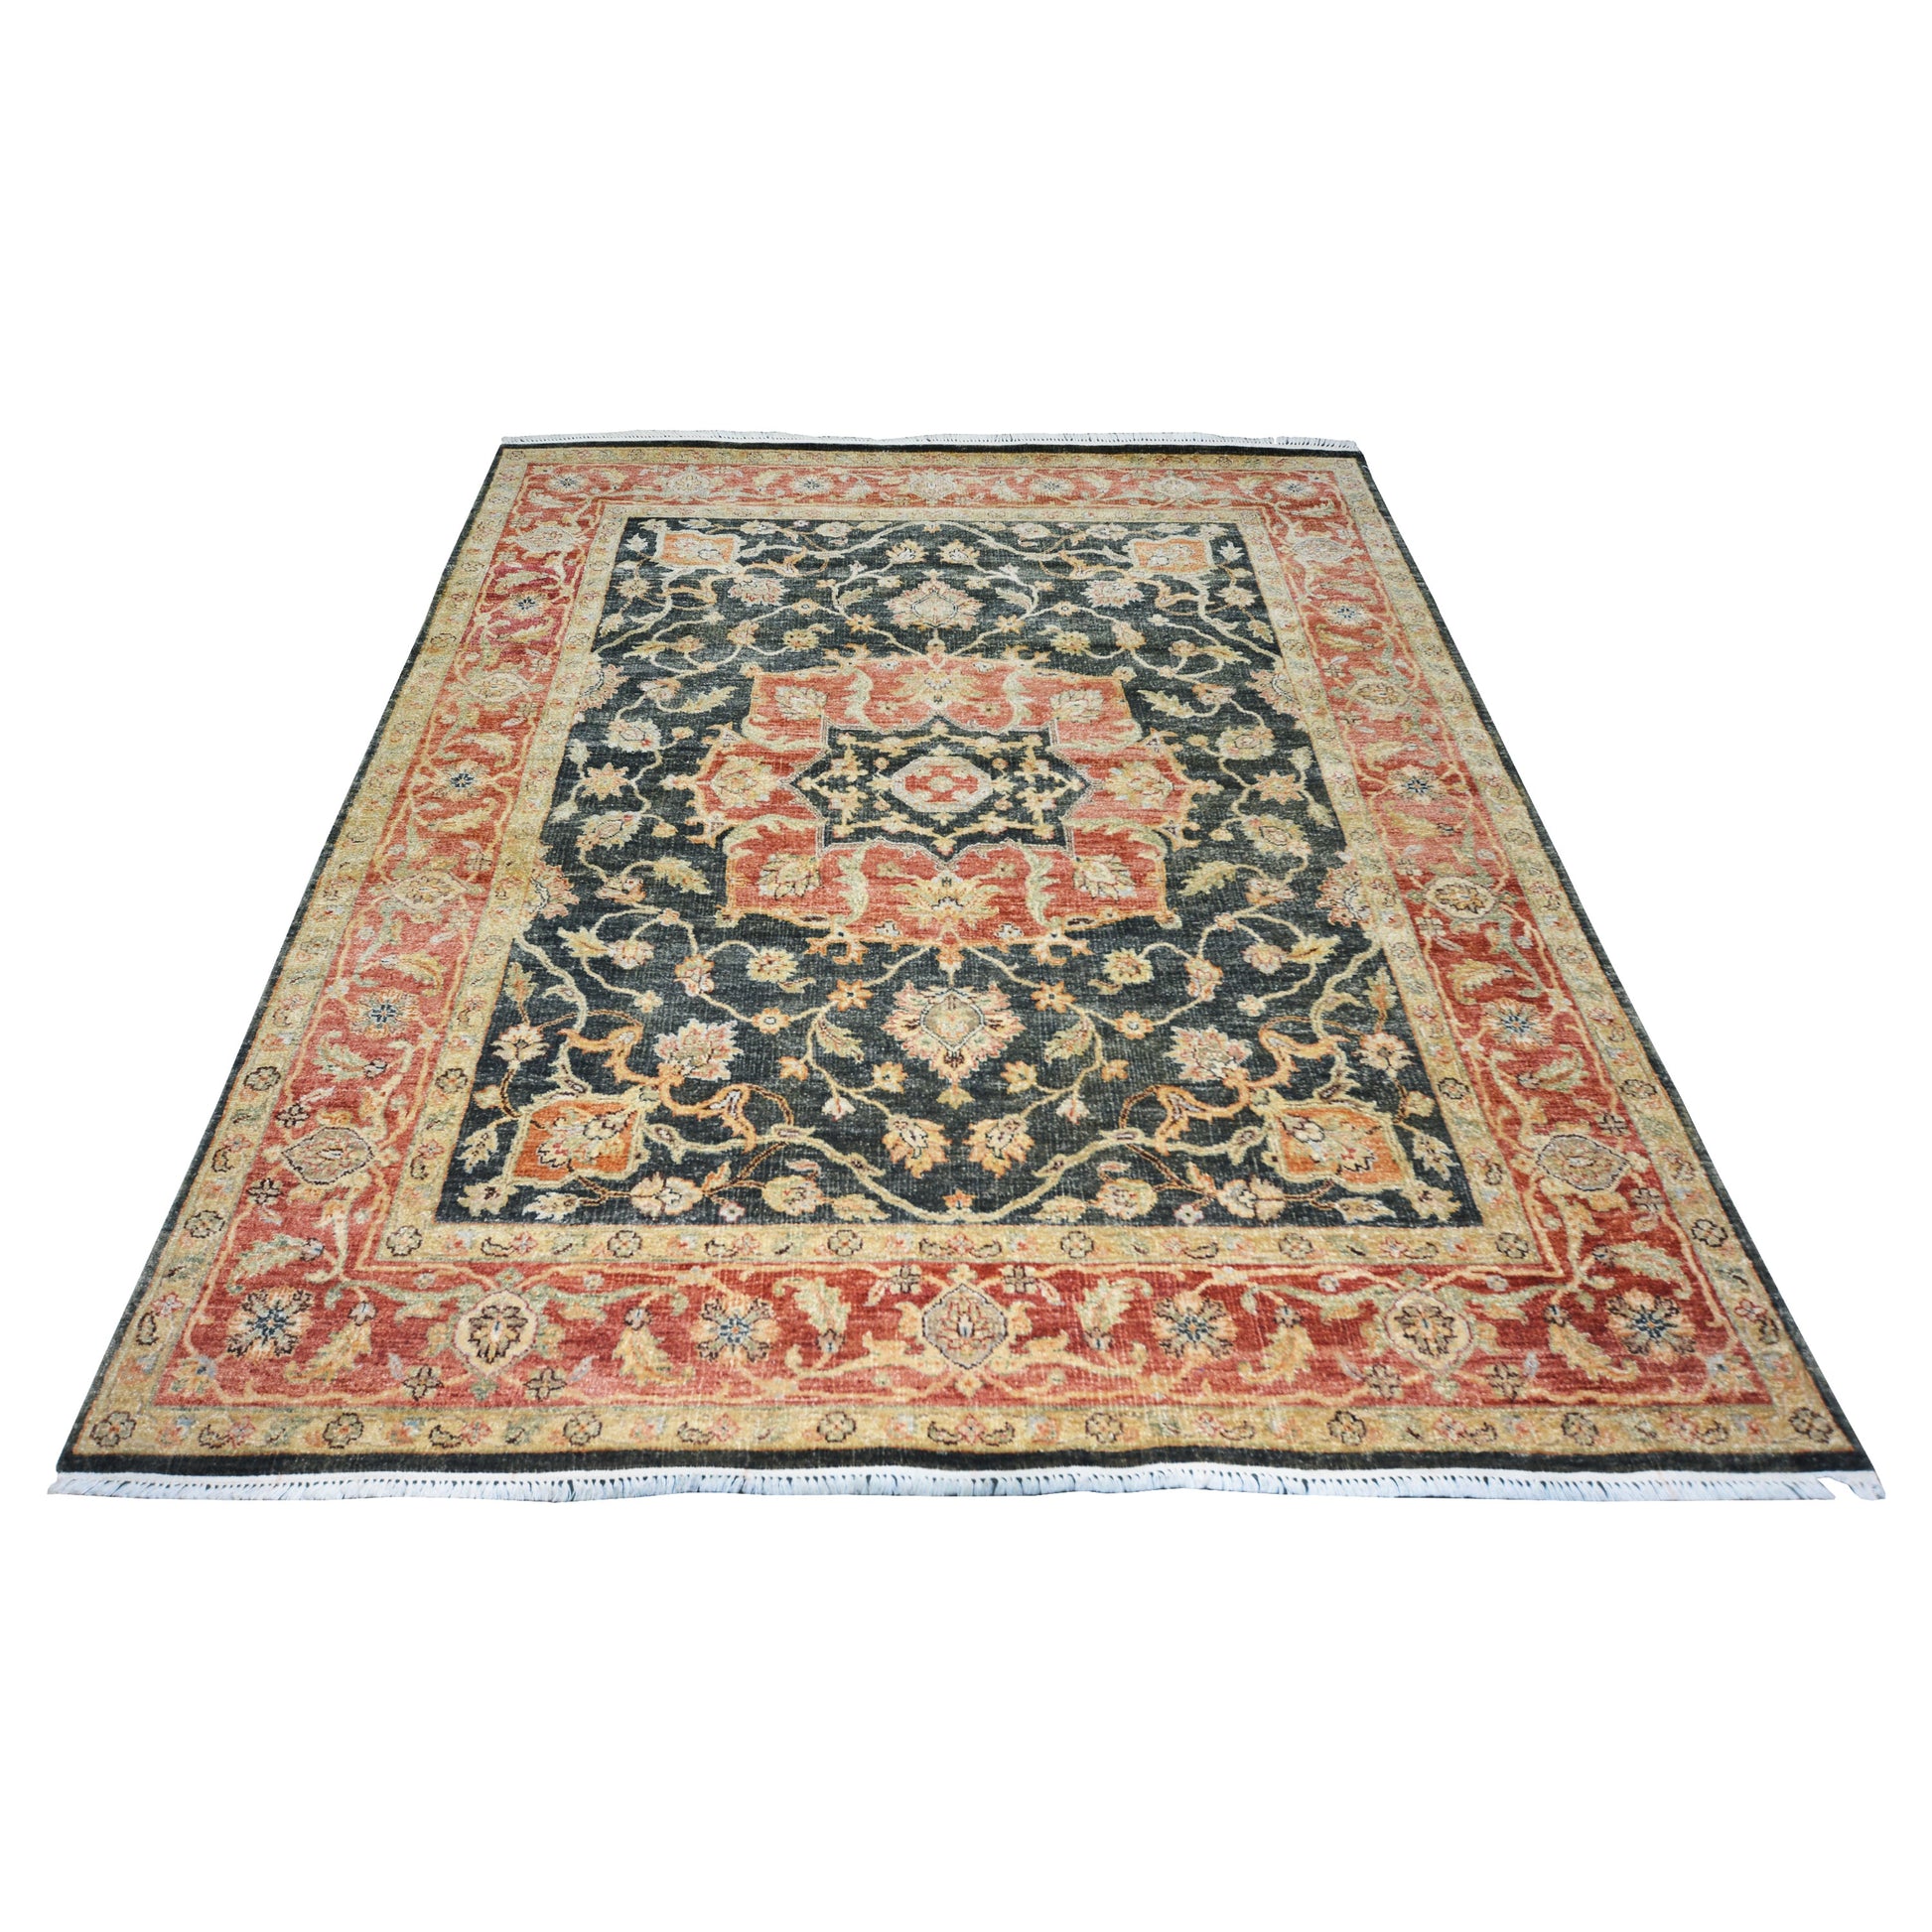 Get trendy with Garden Black, Red and Gold Traditional Heriz Pure Wool Handknotted Area Rug - Traditional Rugs available at Jaipur Oriental Rugs. Grab yours for $3345.00 today!